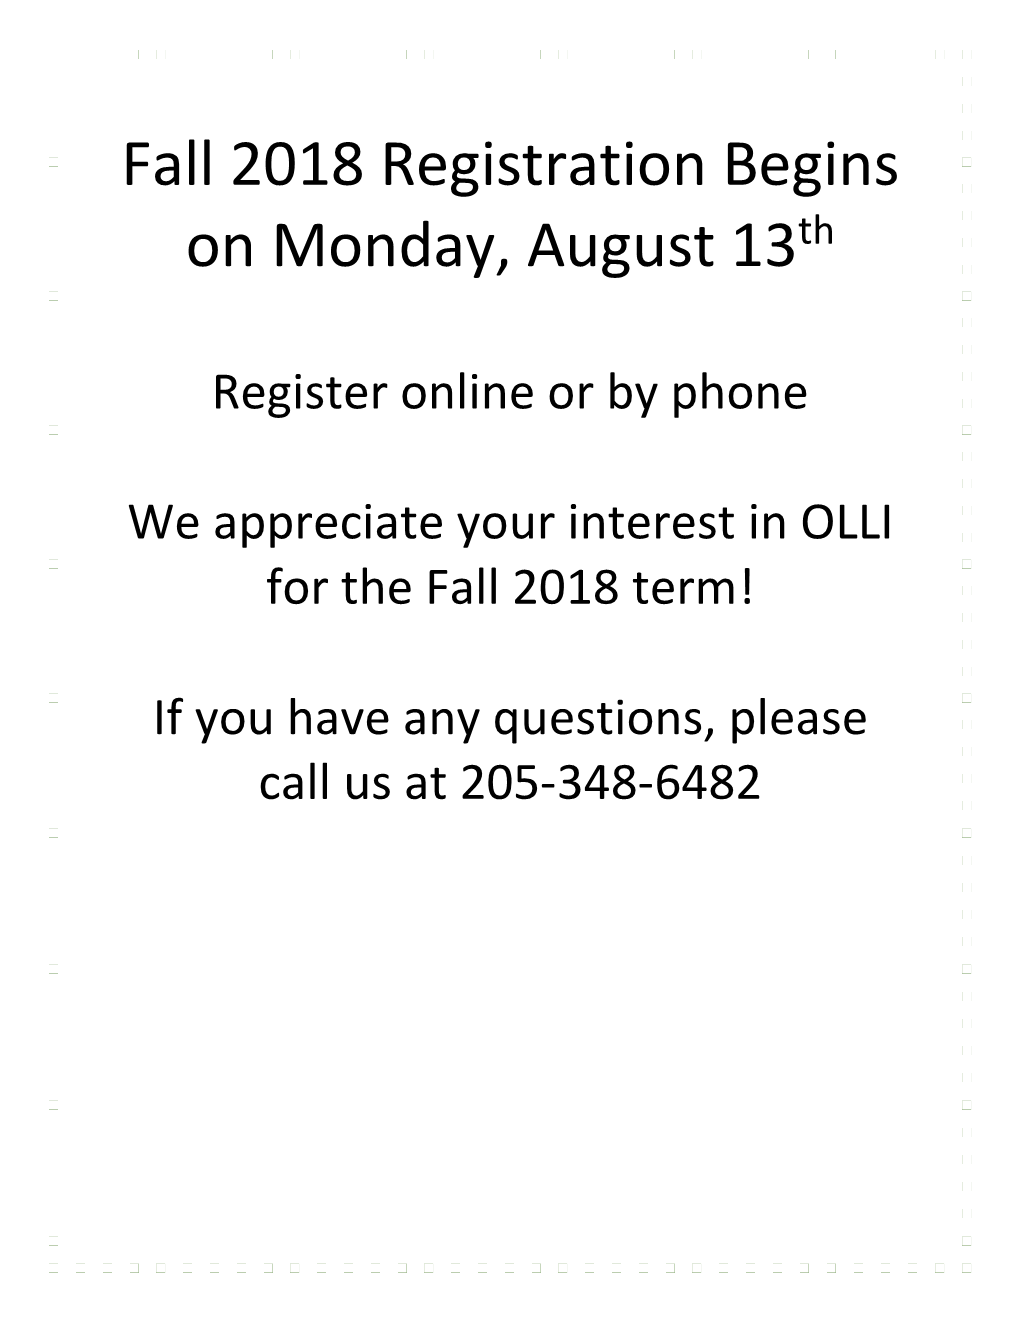 Fall 2018 Registration Begins on Monday, August 13Th